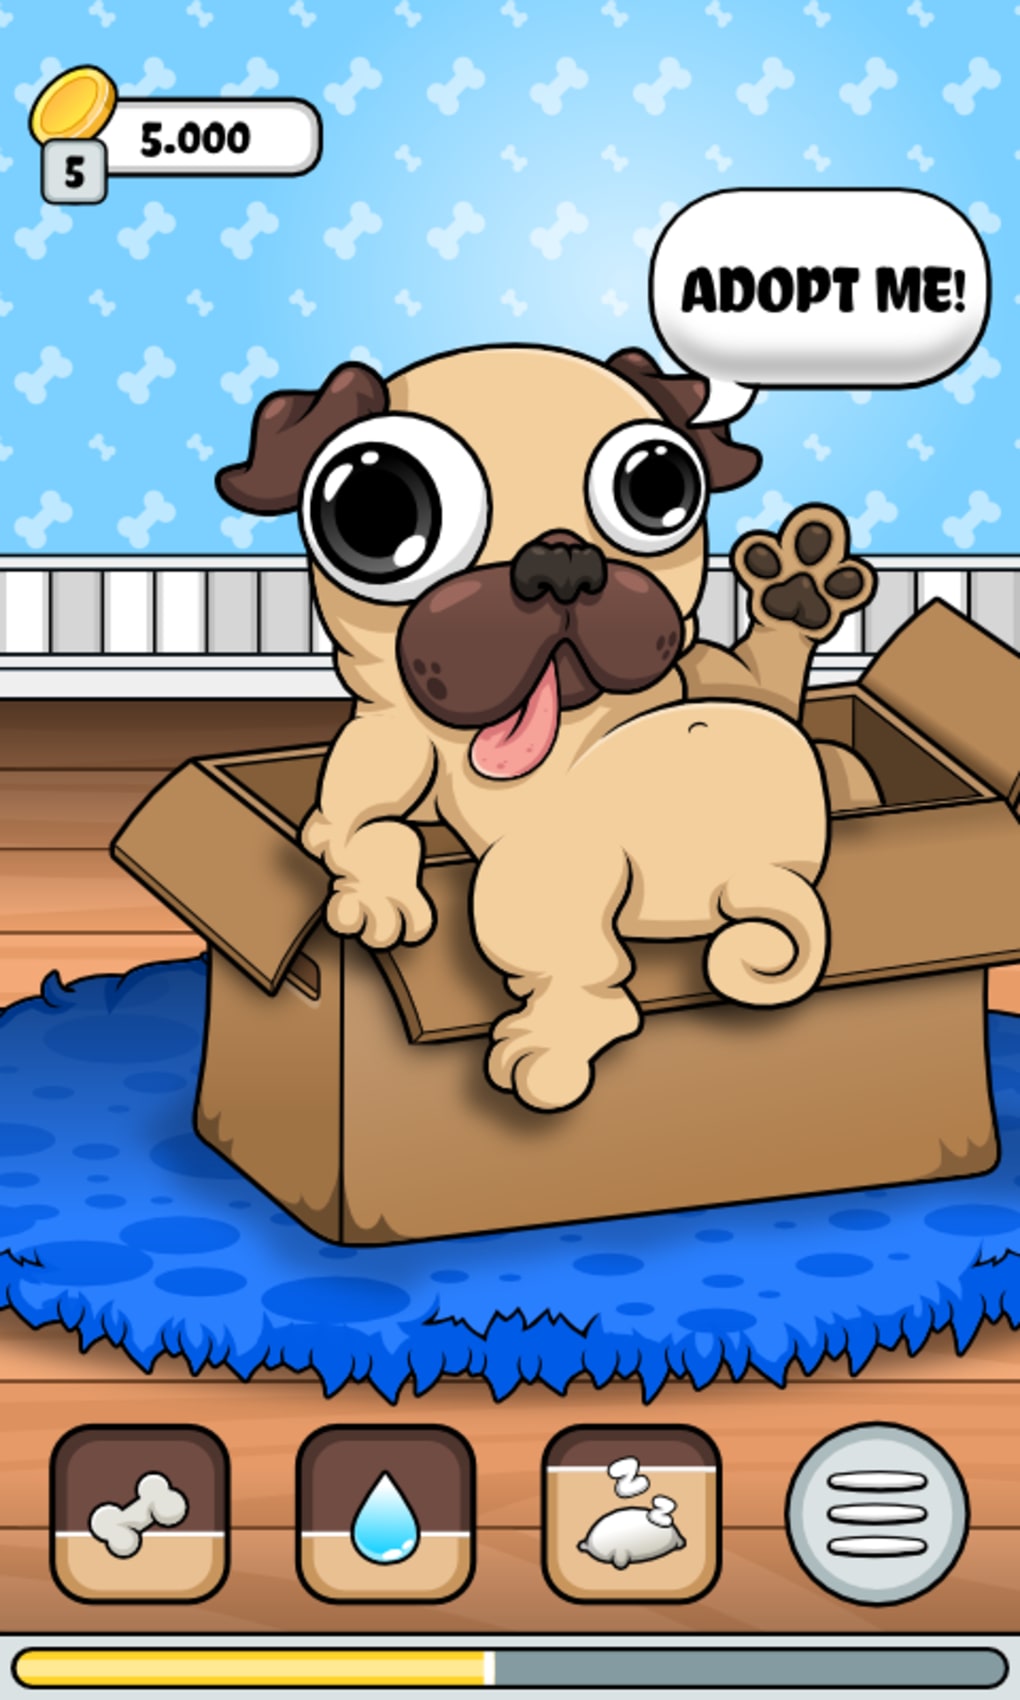 Adopt Me Pets Instructions (Unofficial) APK for Android Download